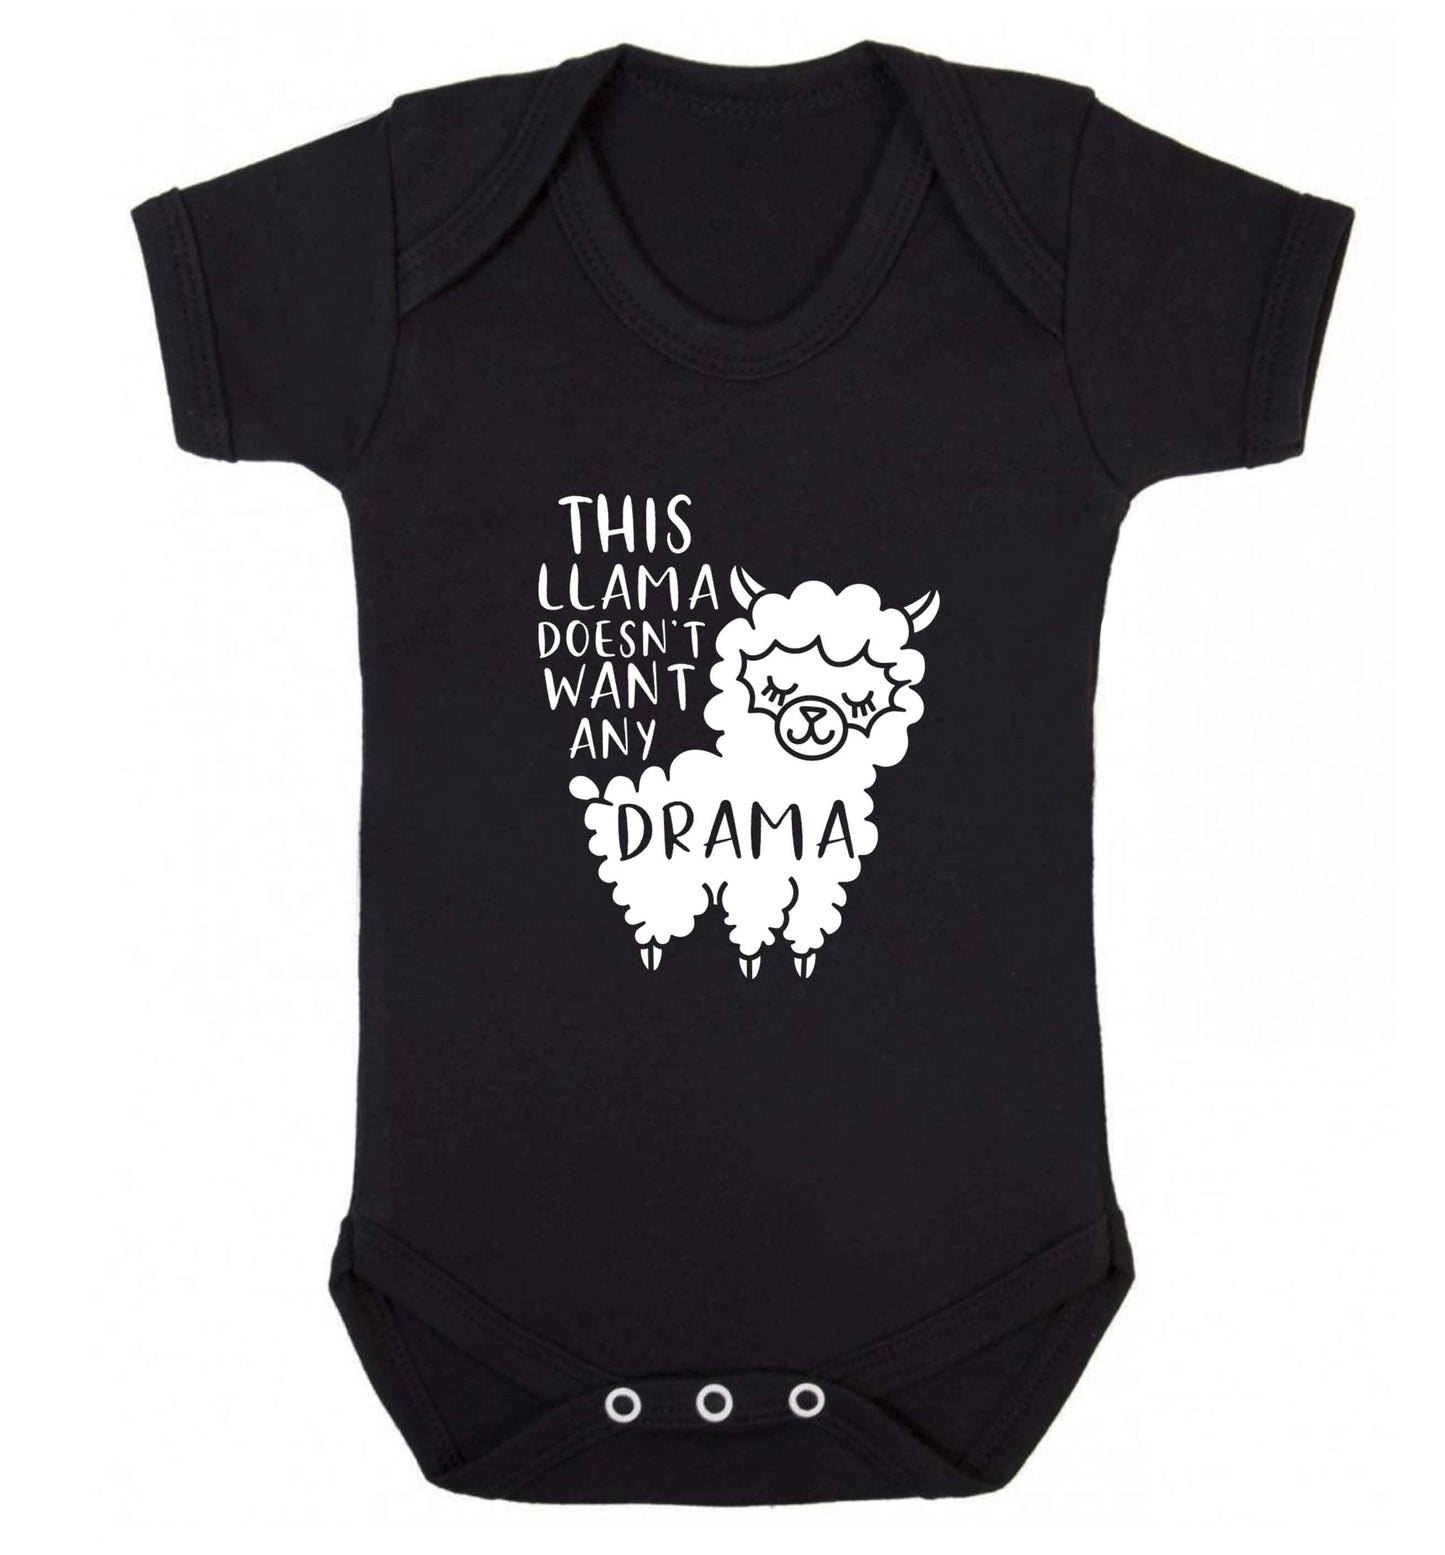 This Llama doesn't want any drama baby vest black 18-24 months